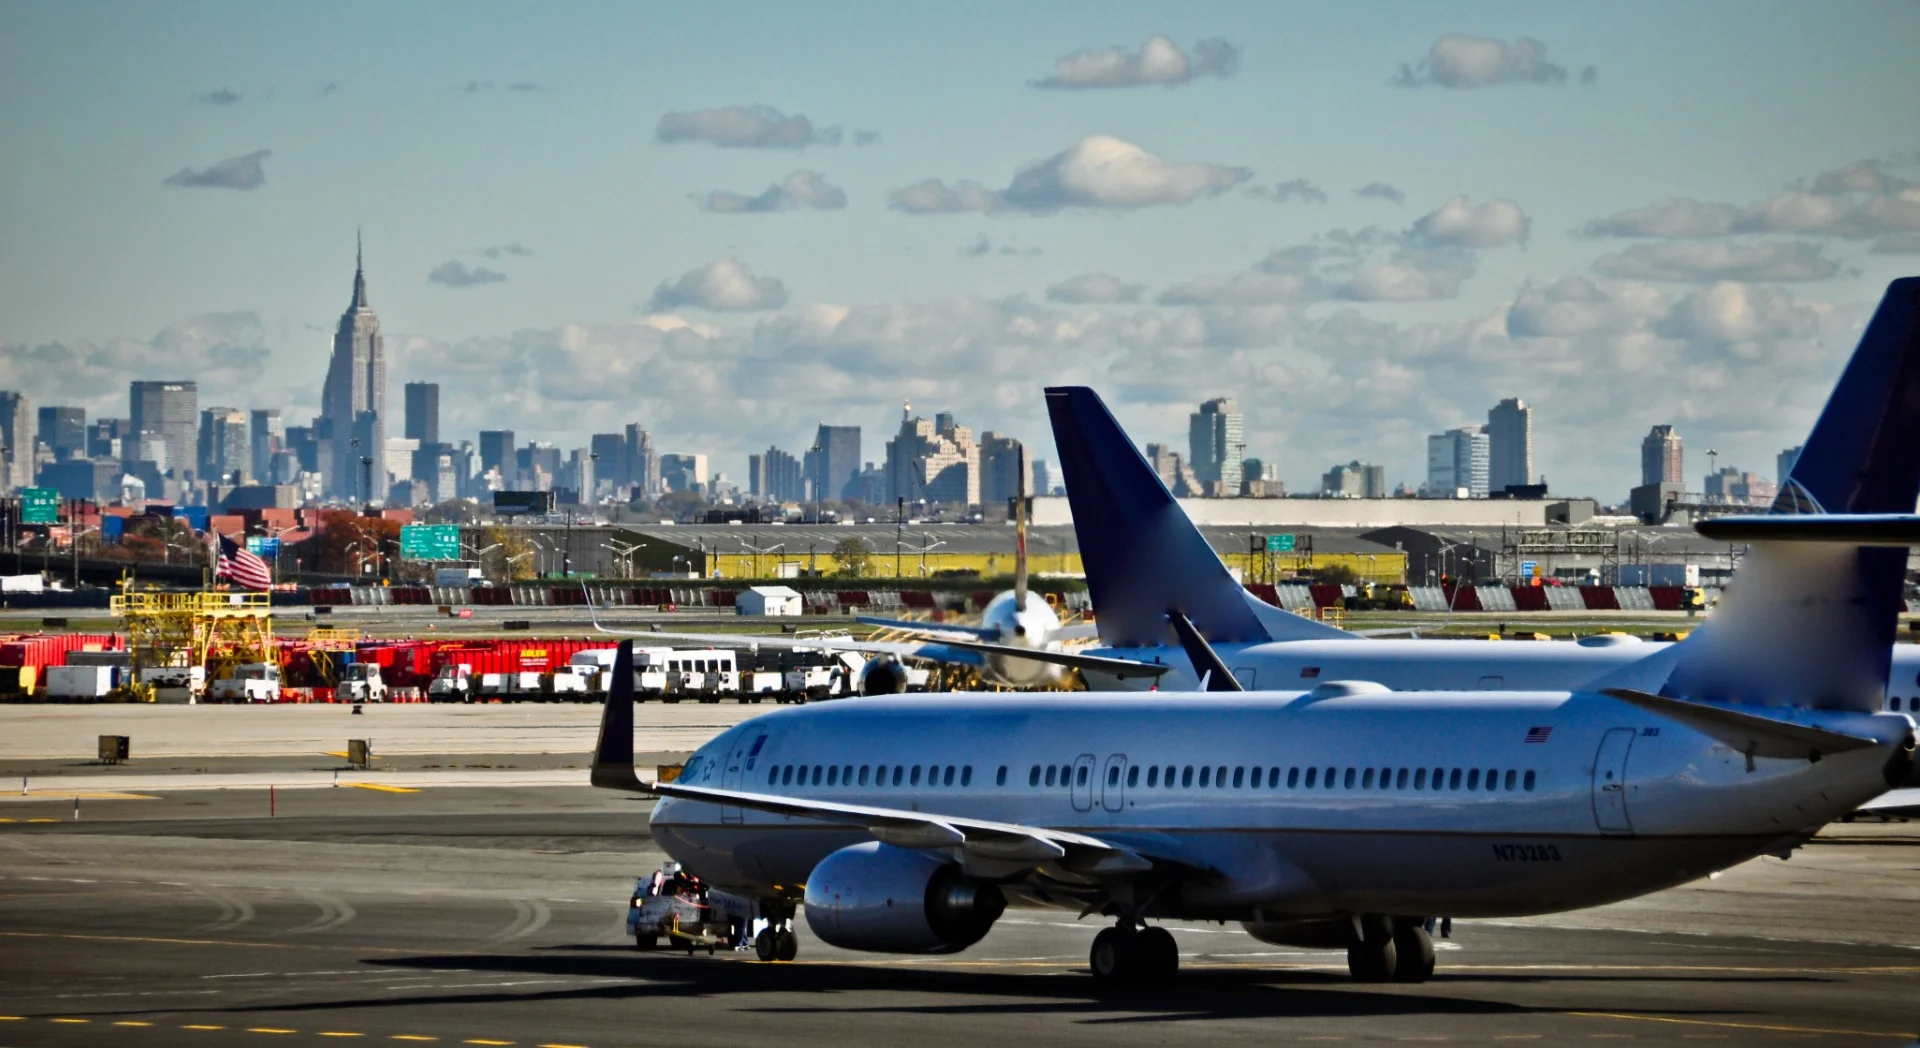 How to Get to Newark Airport